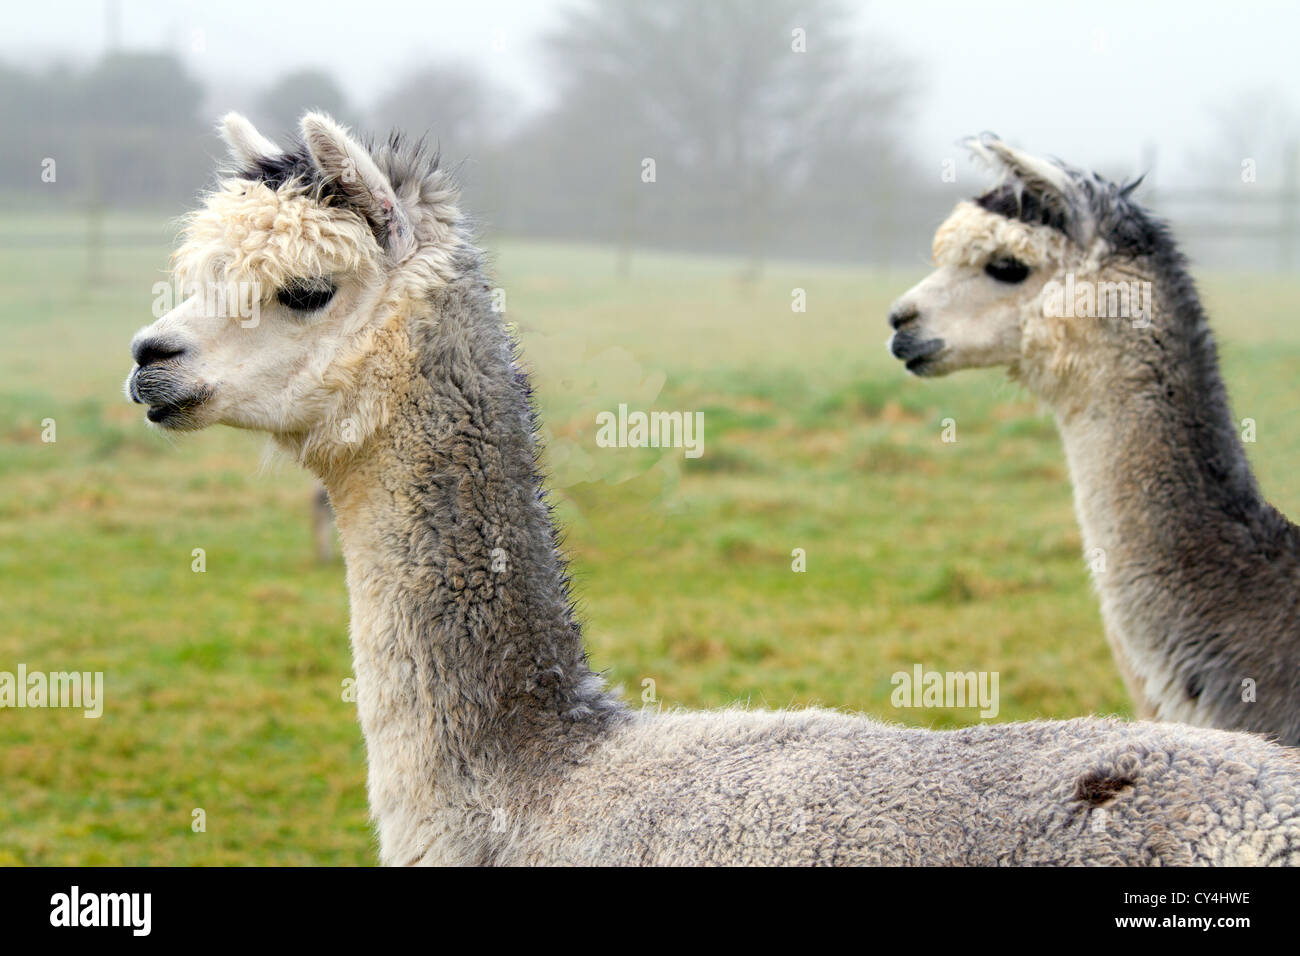 Two alpacas in profile with heads and necks facing the same way Stock Photo